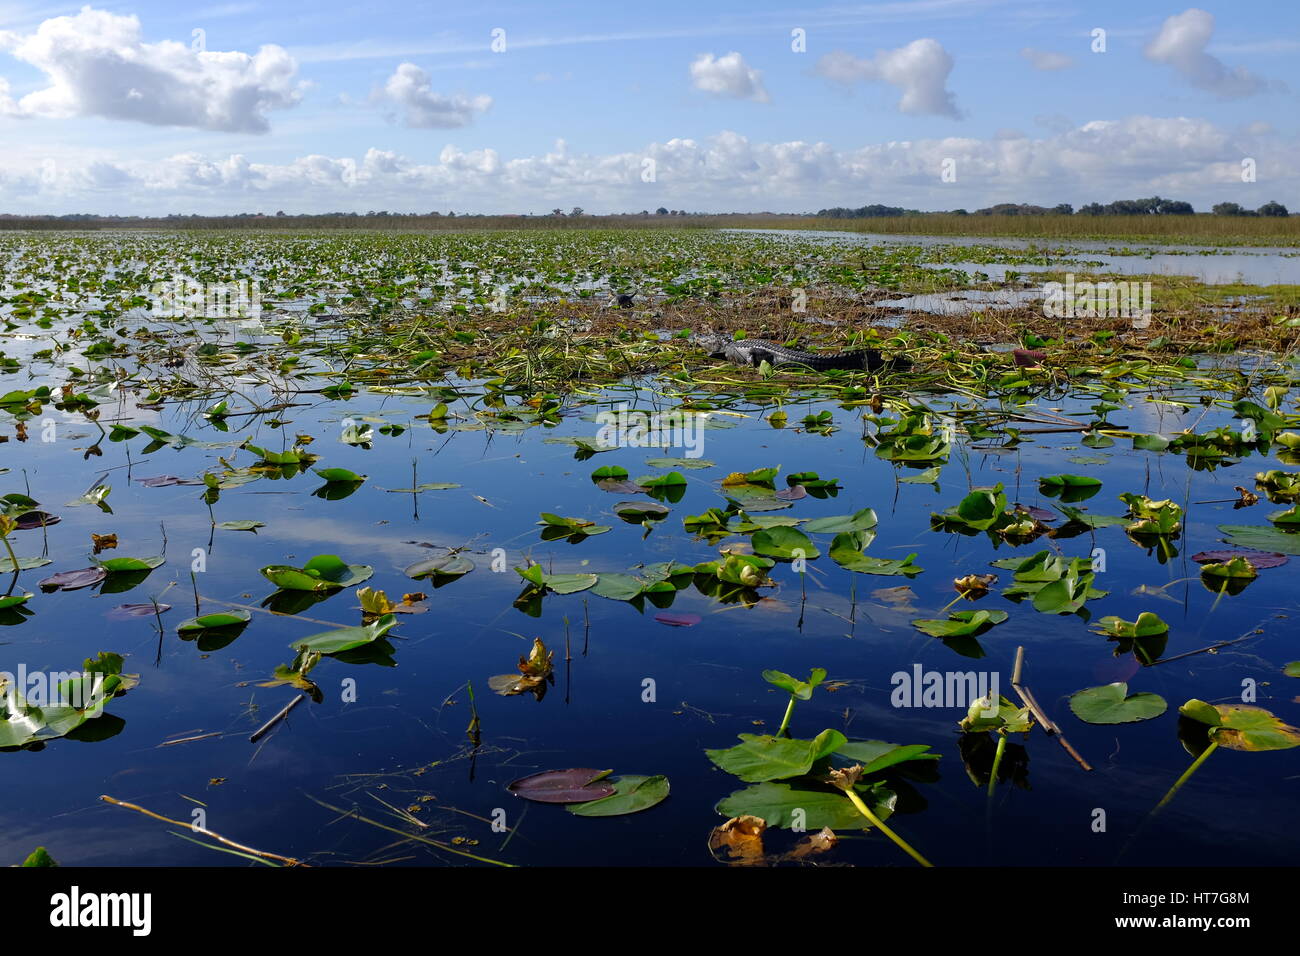 Surrounded by lilies and other vegetation, a large alligator lies basking in the sun on Lake Toho in Central Florida as a turtle quietly eases away. Stock Photo